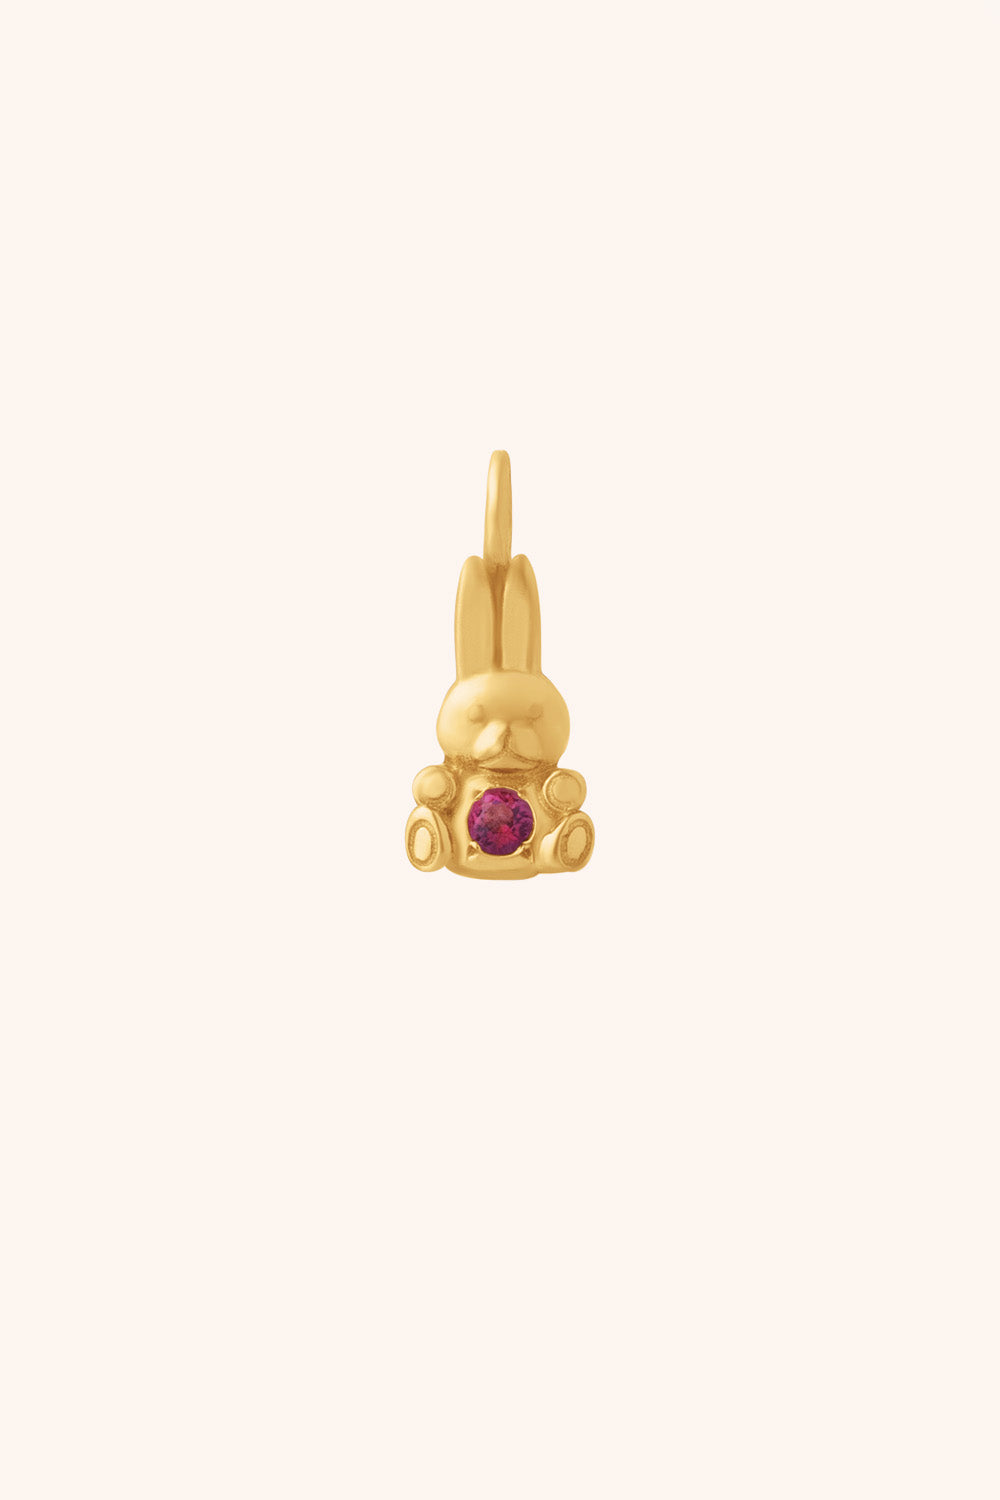 The Fine Gold Bunny Charm